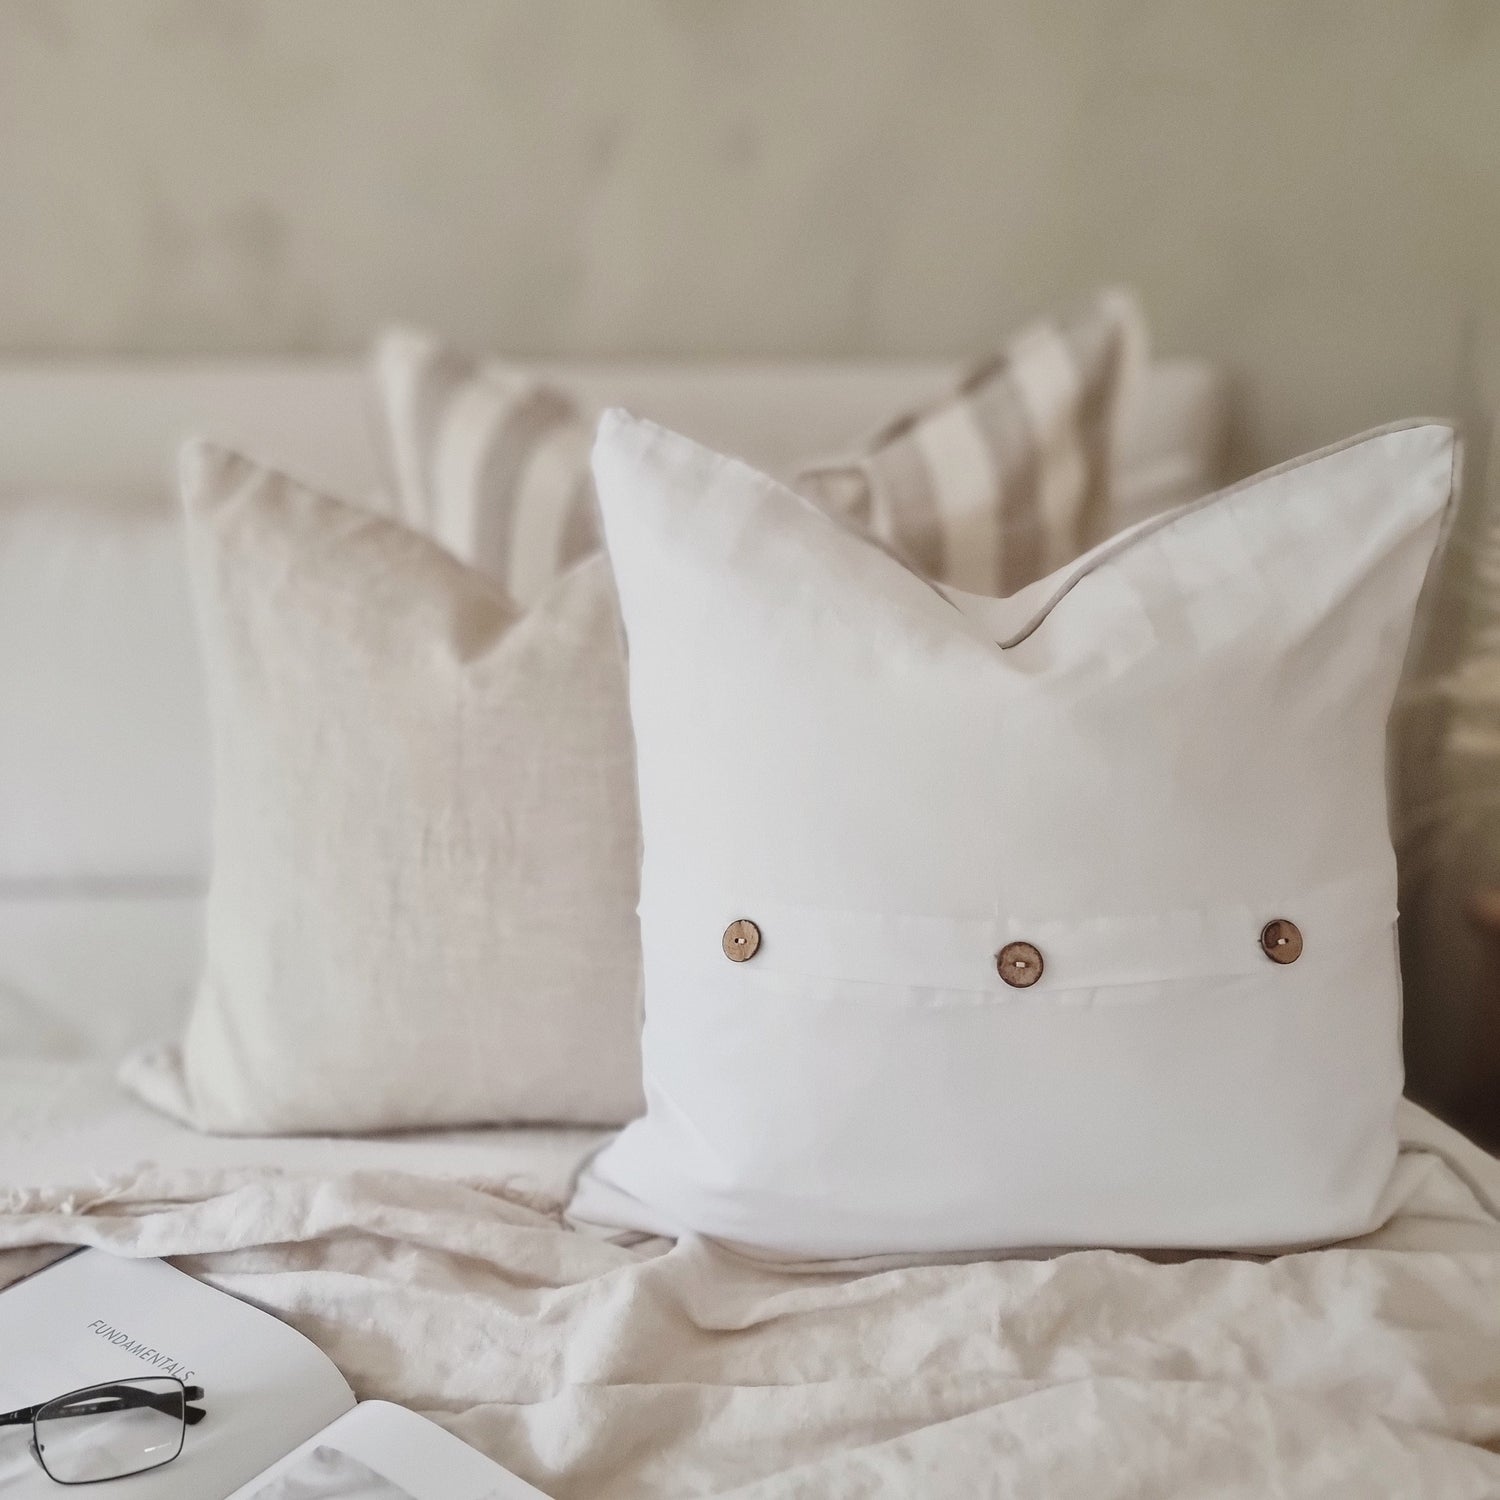 White linen cushion with natural lien piping, piped linen cushions, cushions with piping, White linen piped cushion with wooden buttons, coastal cushions, Hamptons cushions, Hamptons cushion styles, coastal cushion styling, French linen cushion covers, white French linen cushion